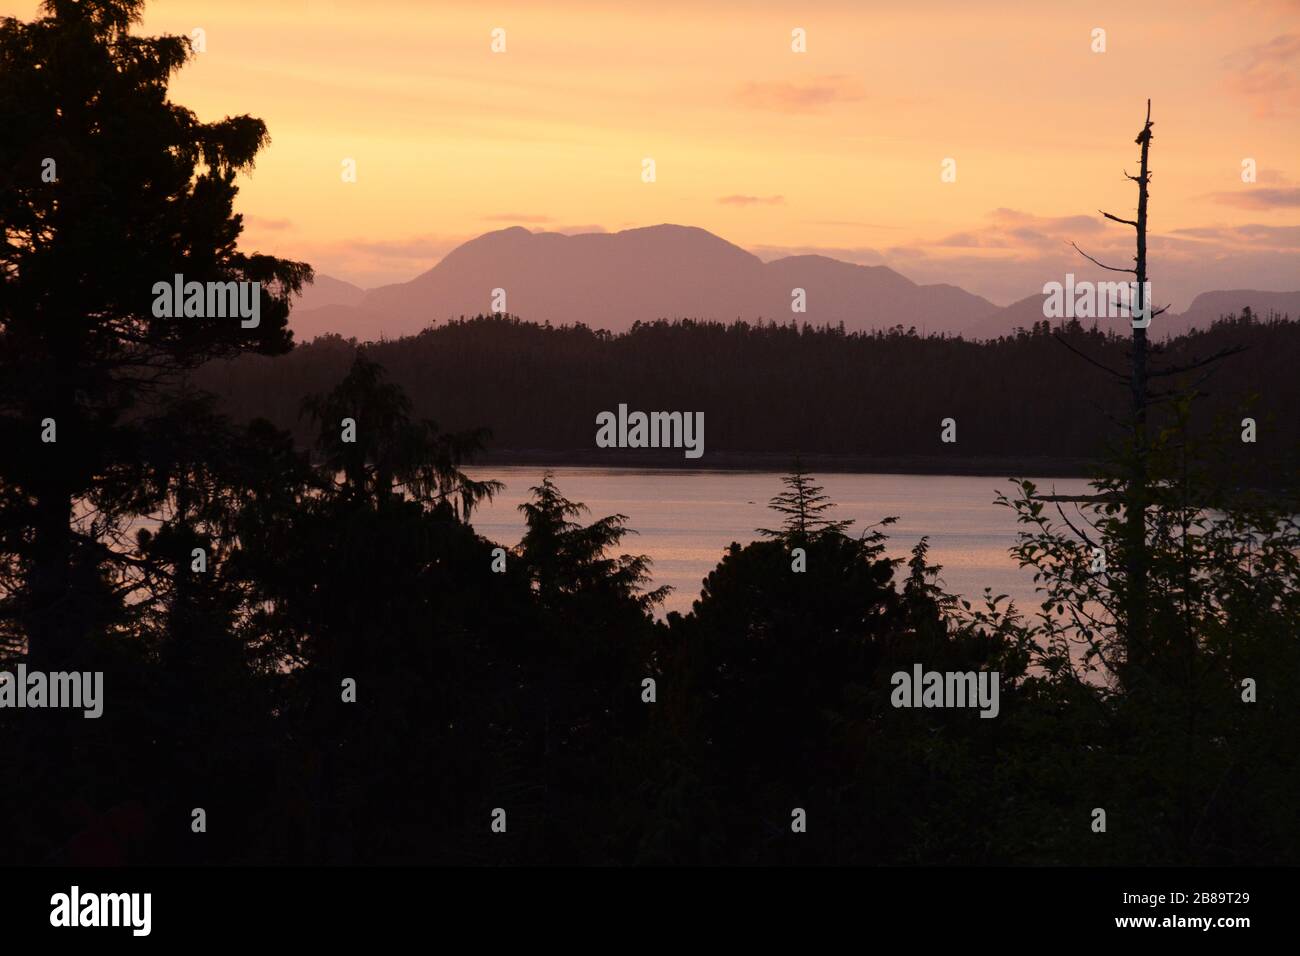 A colourful sunset on the Pacific shores of the Great Bear Rainforest in Heiltsuk First Nation Territory, British Columbia, Canada. Stock Photo